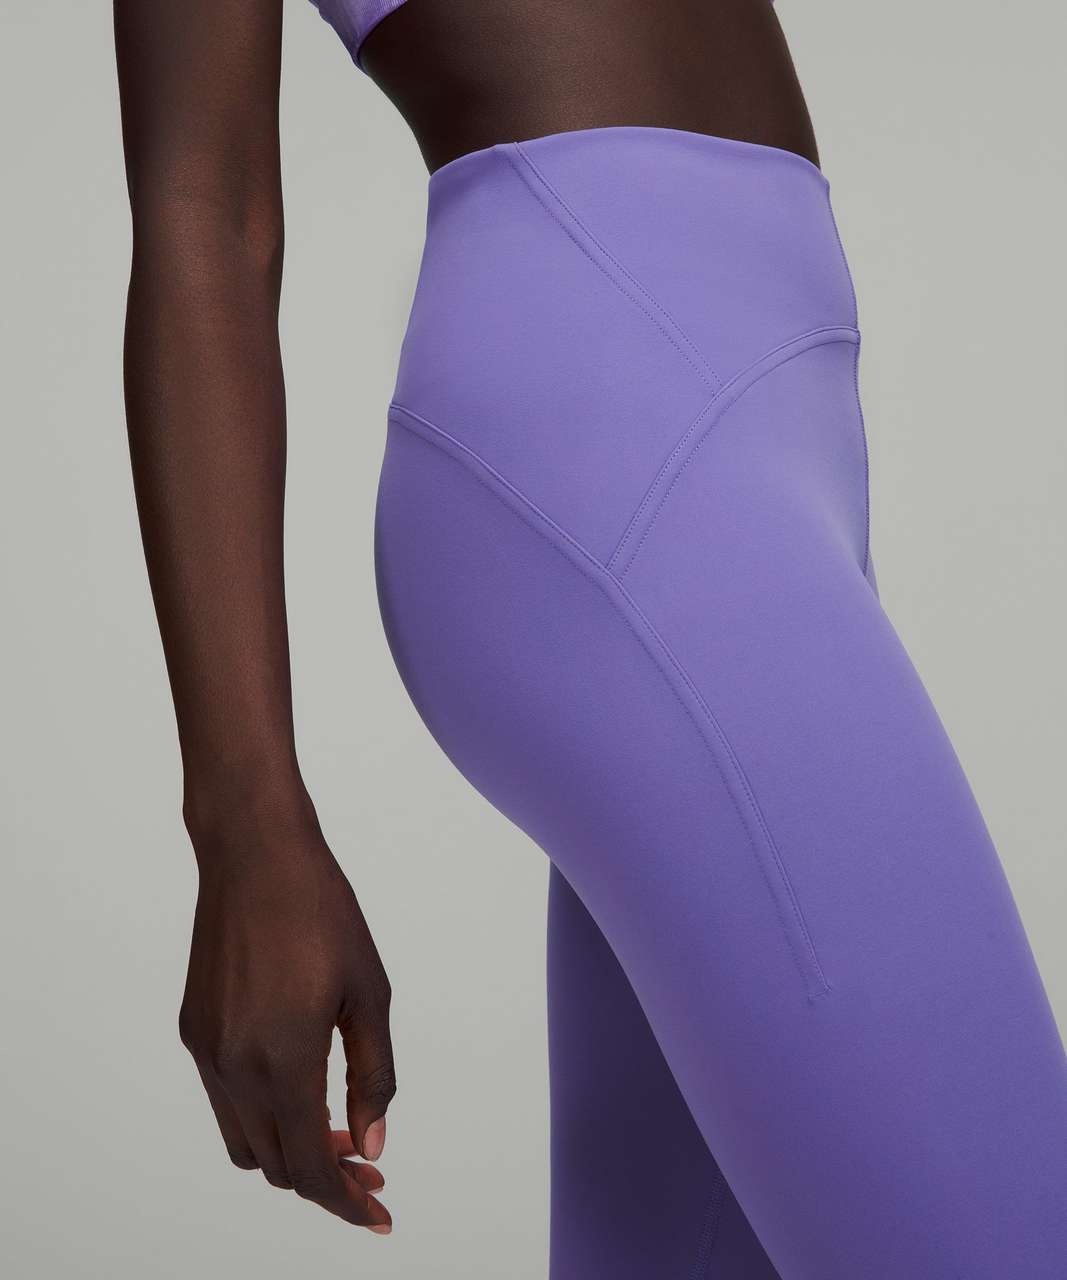 Lululemon INSTILL High-Rise Tight 25 Size 4 - $80 New With Tags - From  Maddie